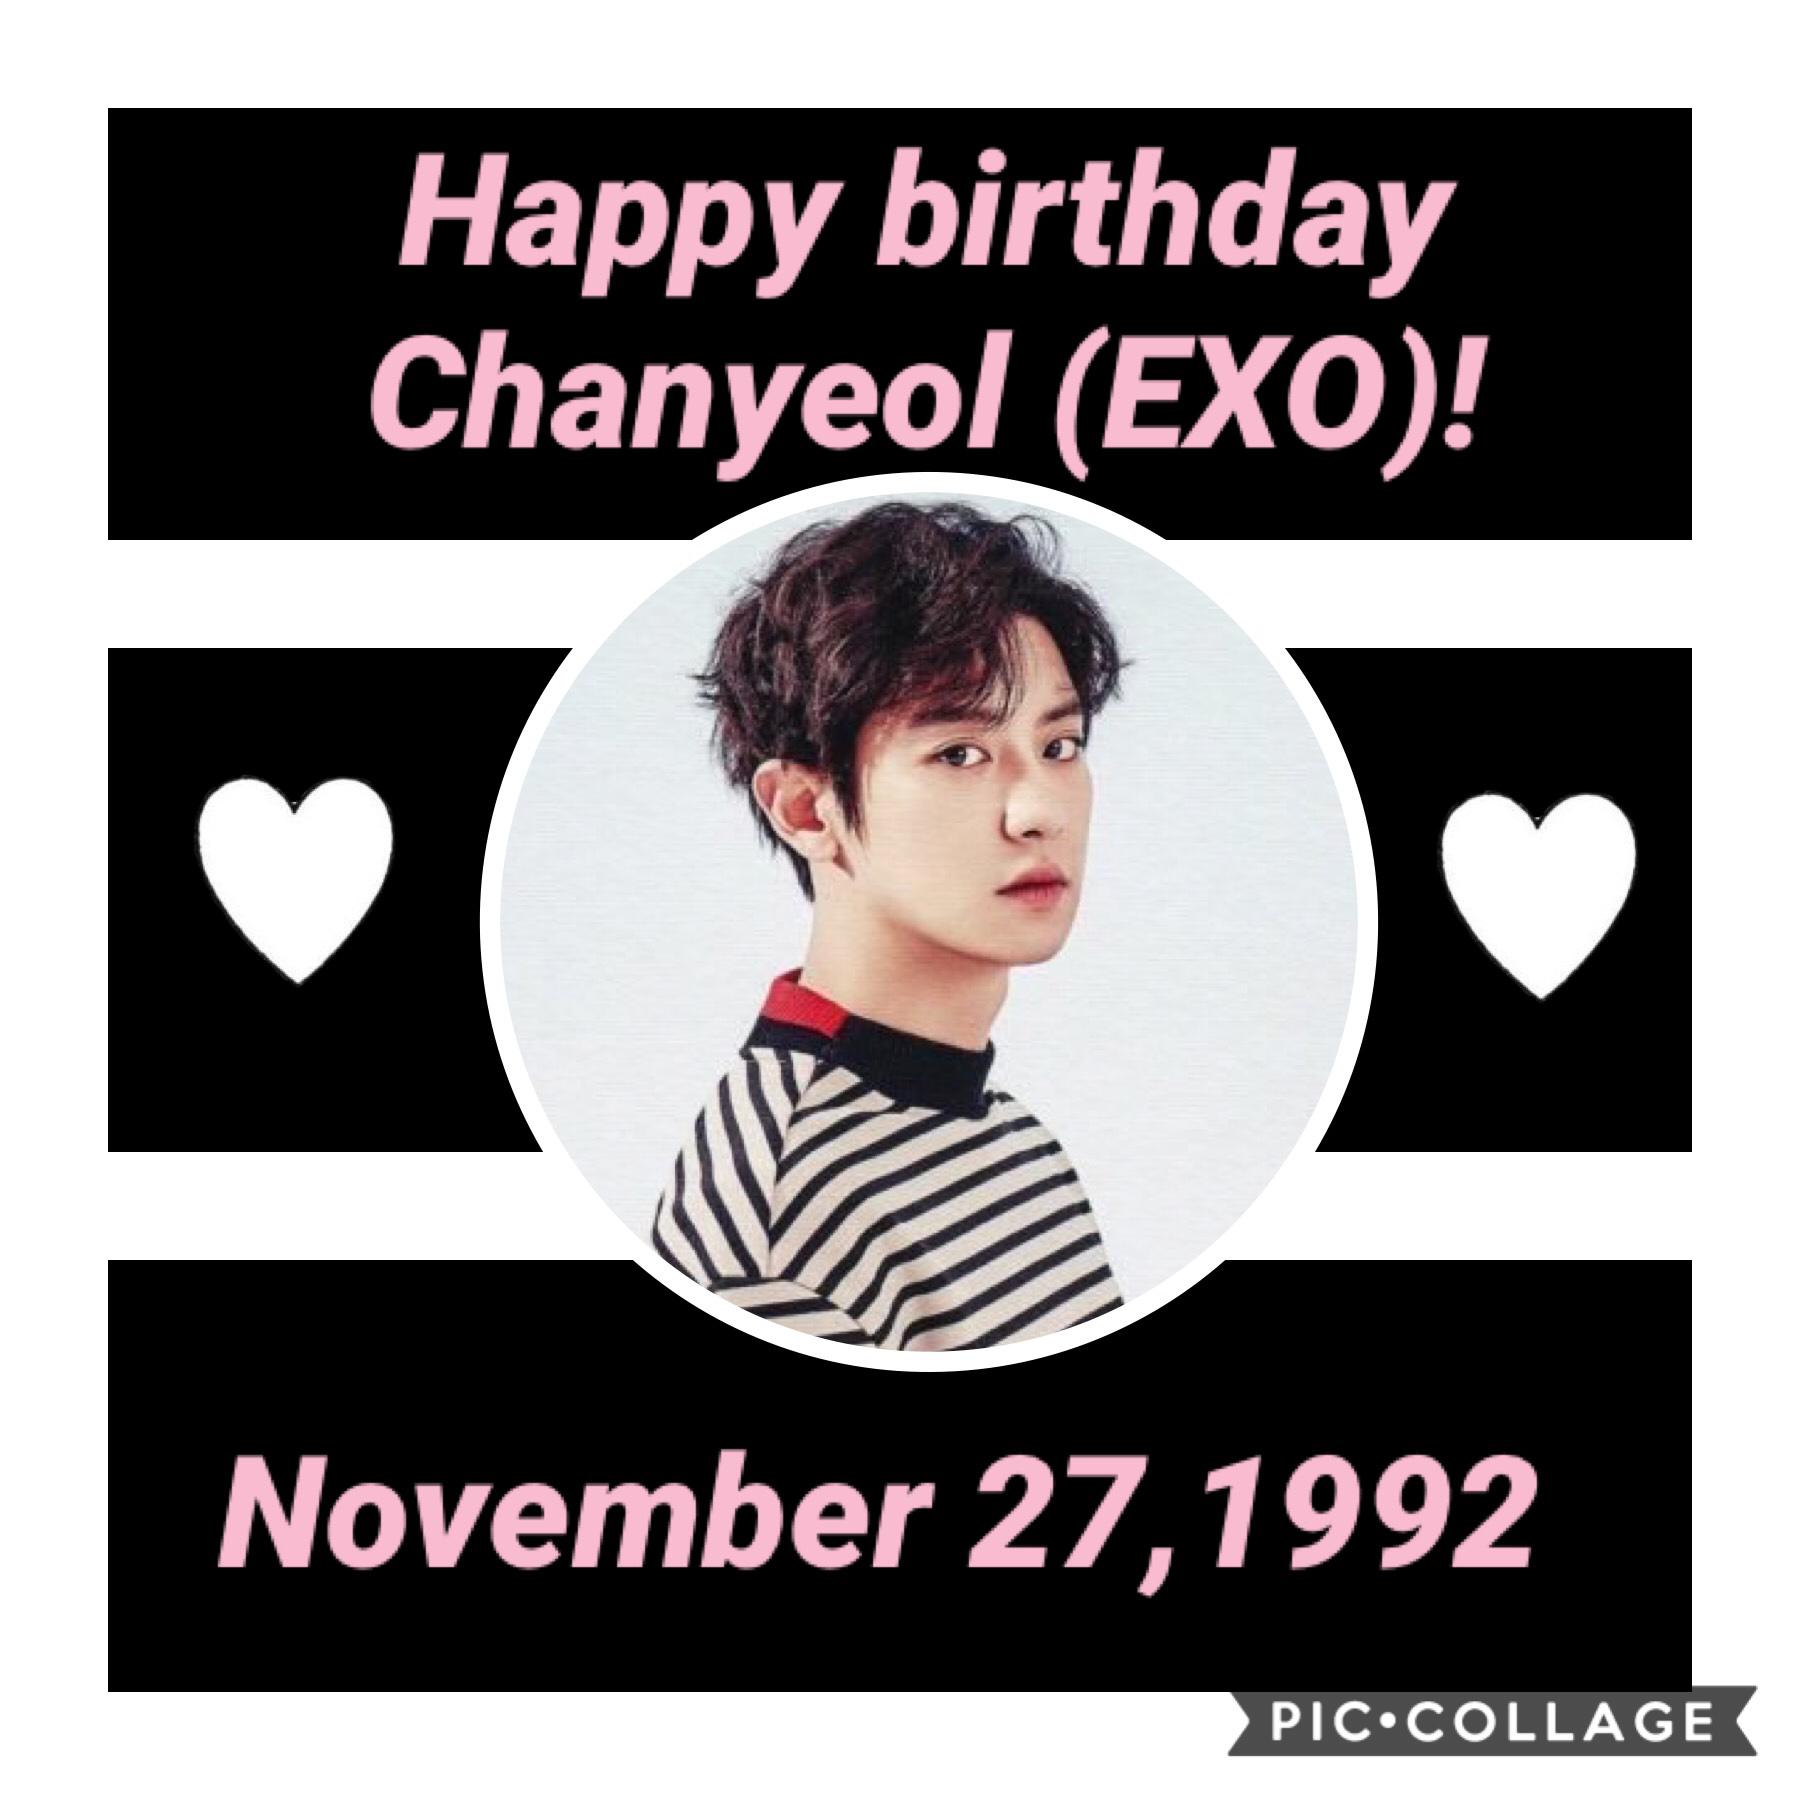 •Park Chanyeol•
AhHhhh I love him omg he’s such a great vocalist even though he’s a rapper.
Btw rap line snapped in EXO’s latest comeback LOL😂😂
*SEHUN GOT LINES*
But rip Lay’s lines:(